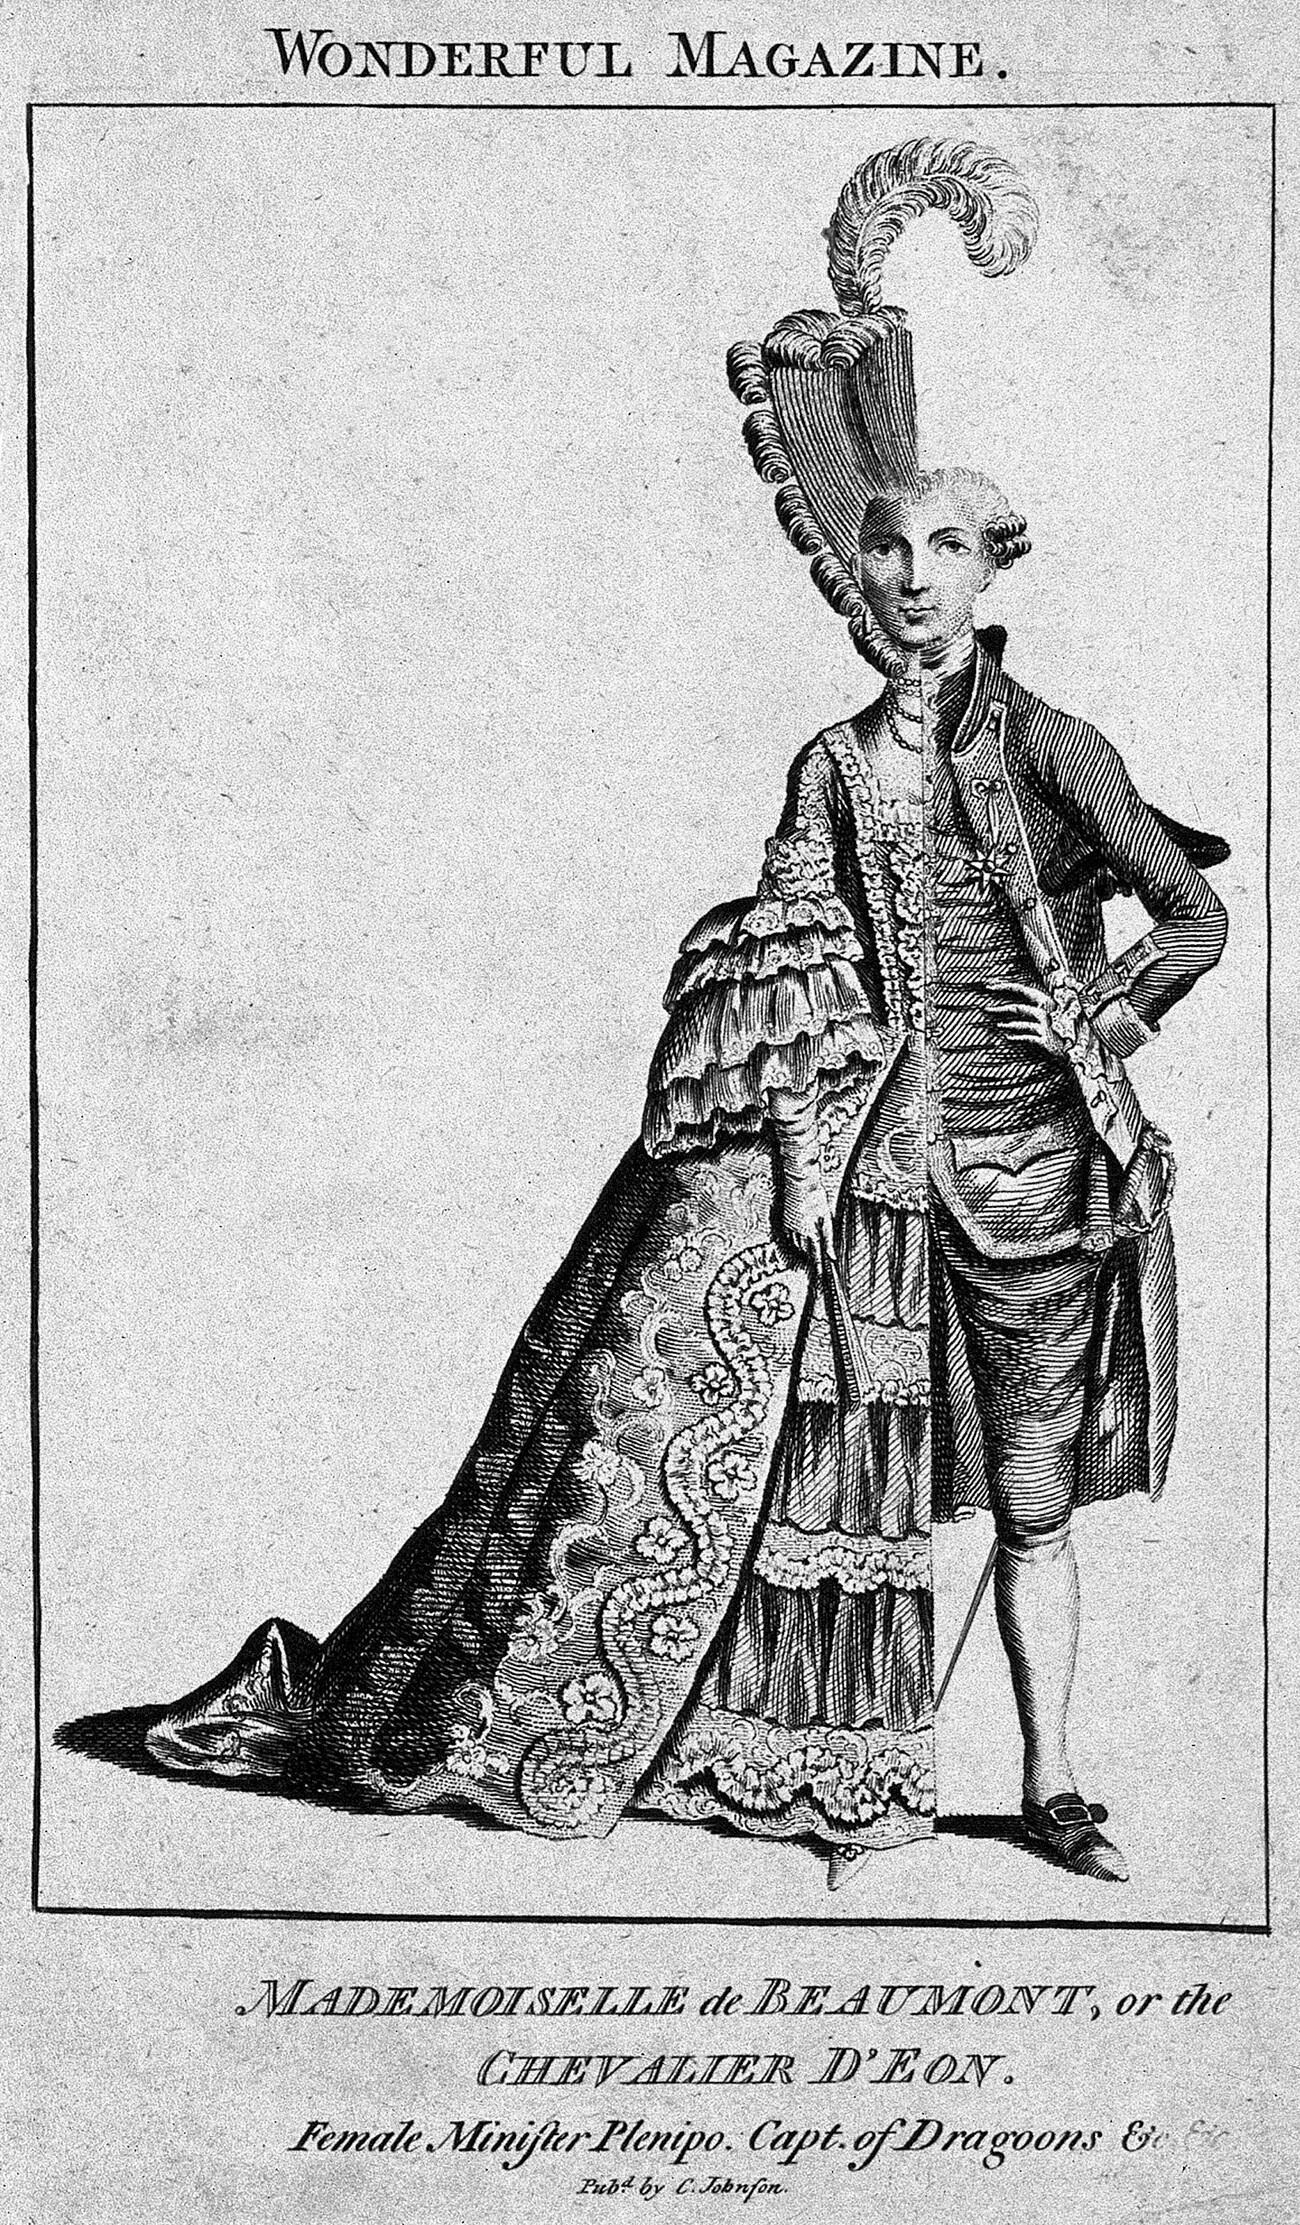 Chevalier d'Éon, aka Charlotte d'Éon de Beaumont, who allegedly 'discovered' the 'testament.' Caricature from the London Magazine, 1777